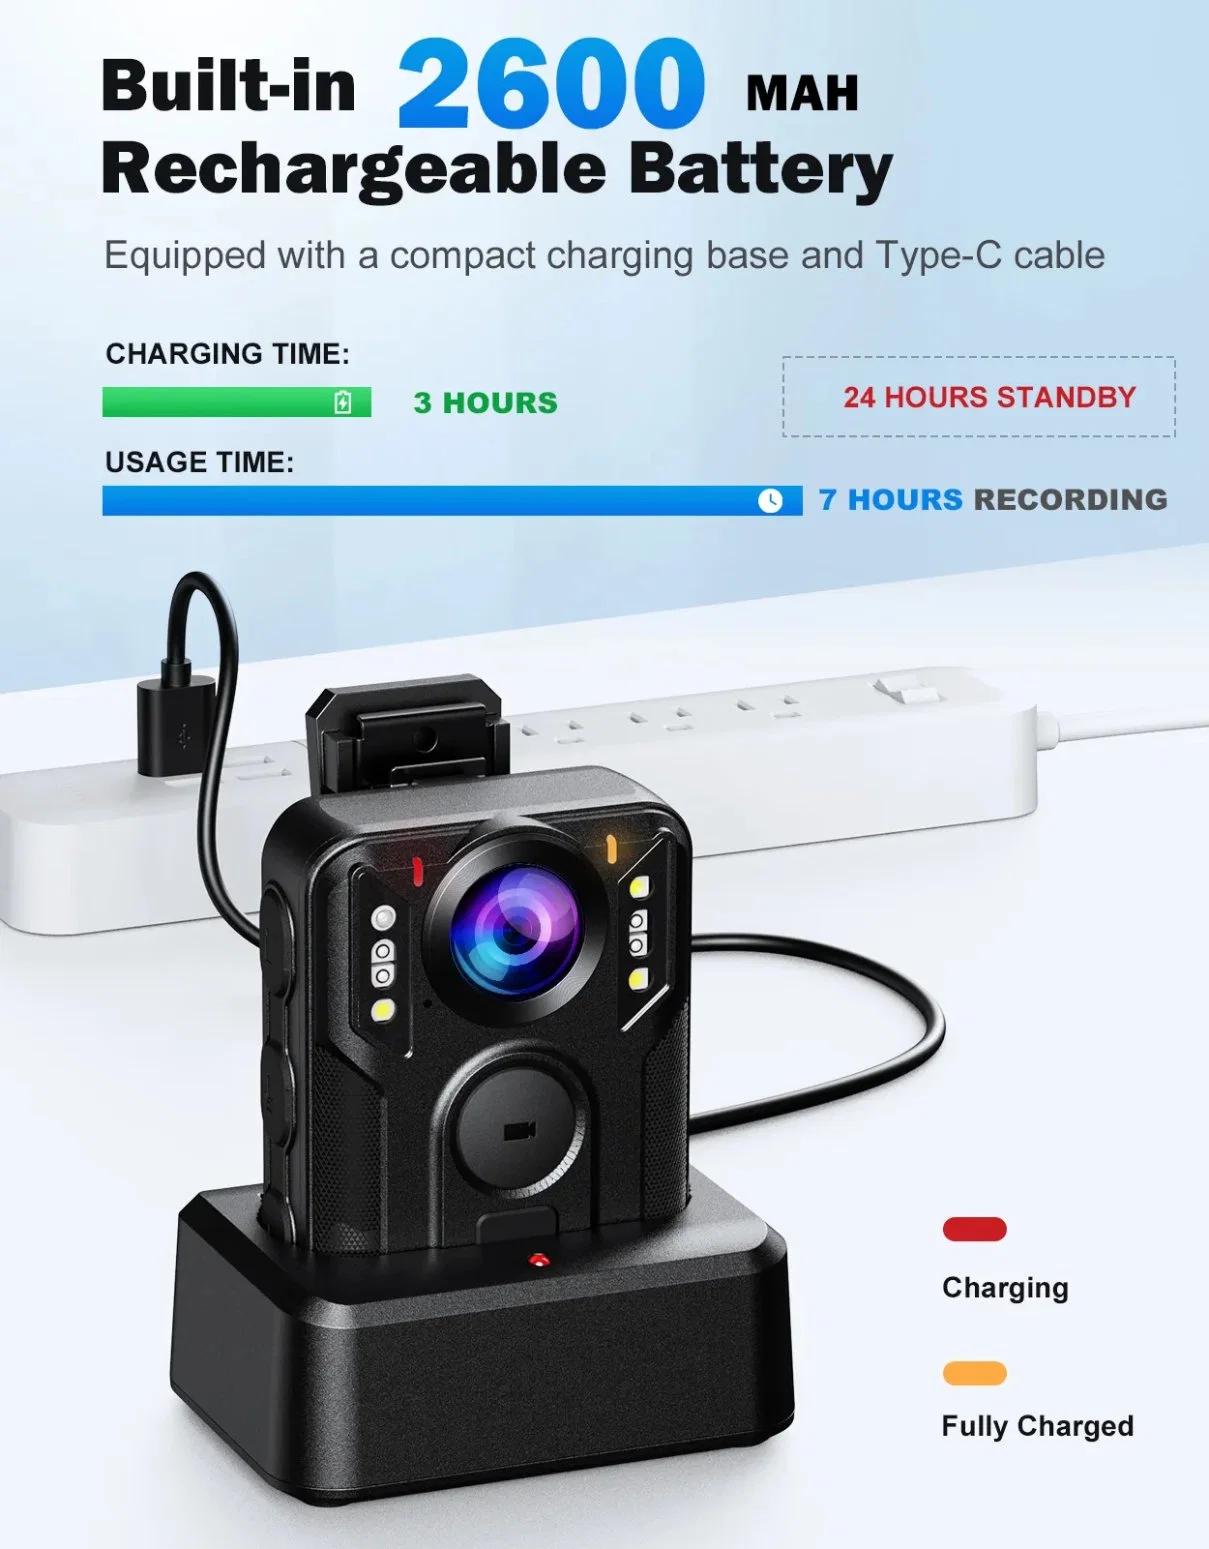 128GB 4K Body Mounted Camera with GPS, 3100mAh Battery for 10-12hours Shooting, Red-Blue Alarm